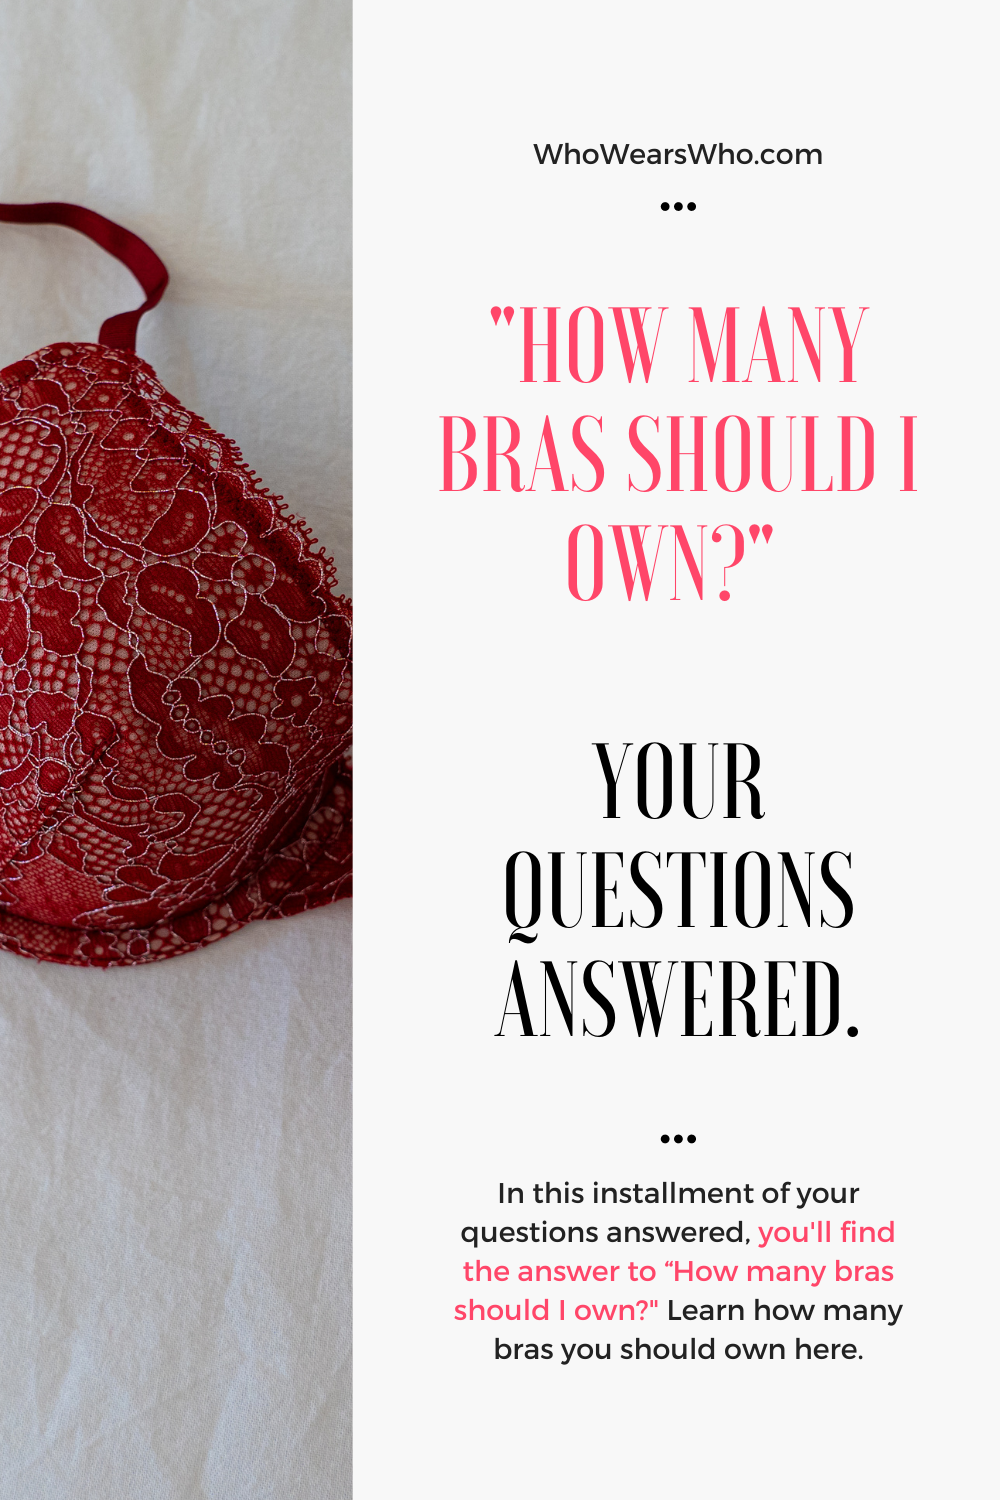 How many bras should I own